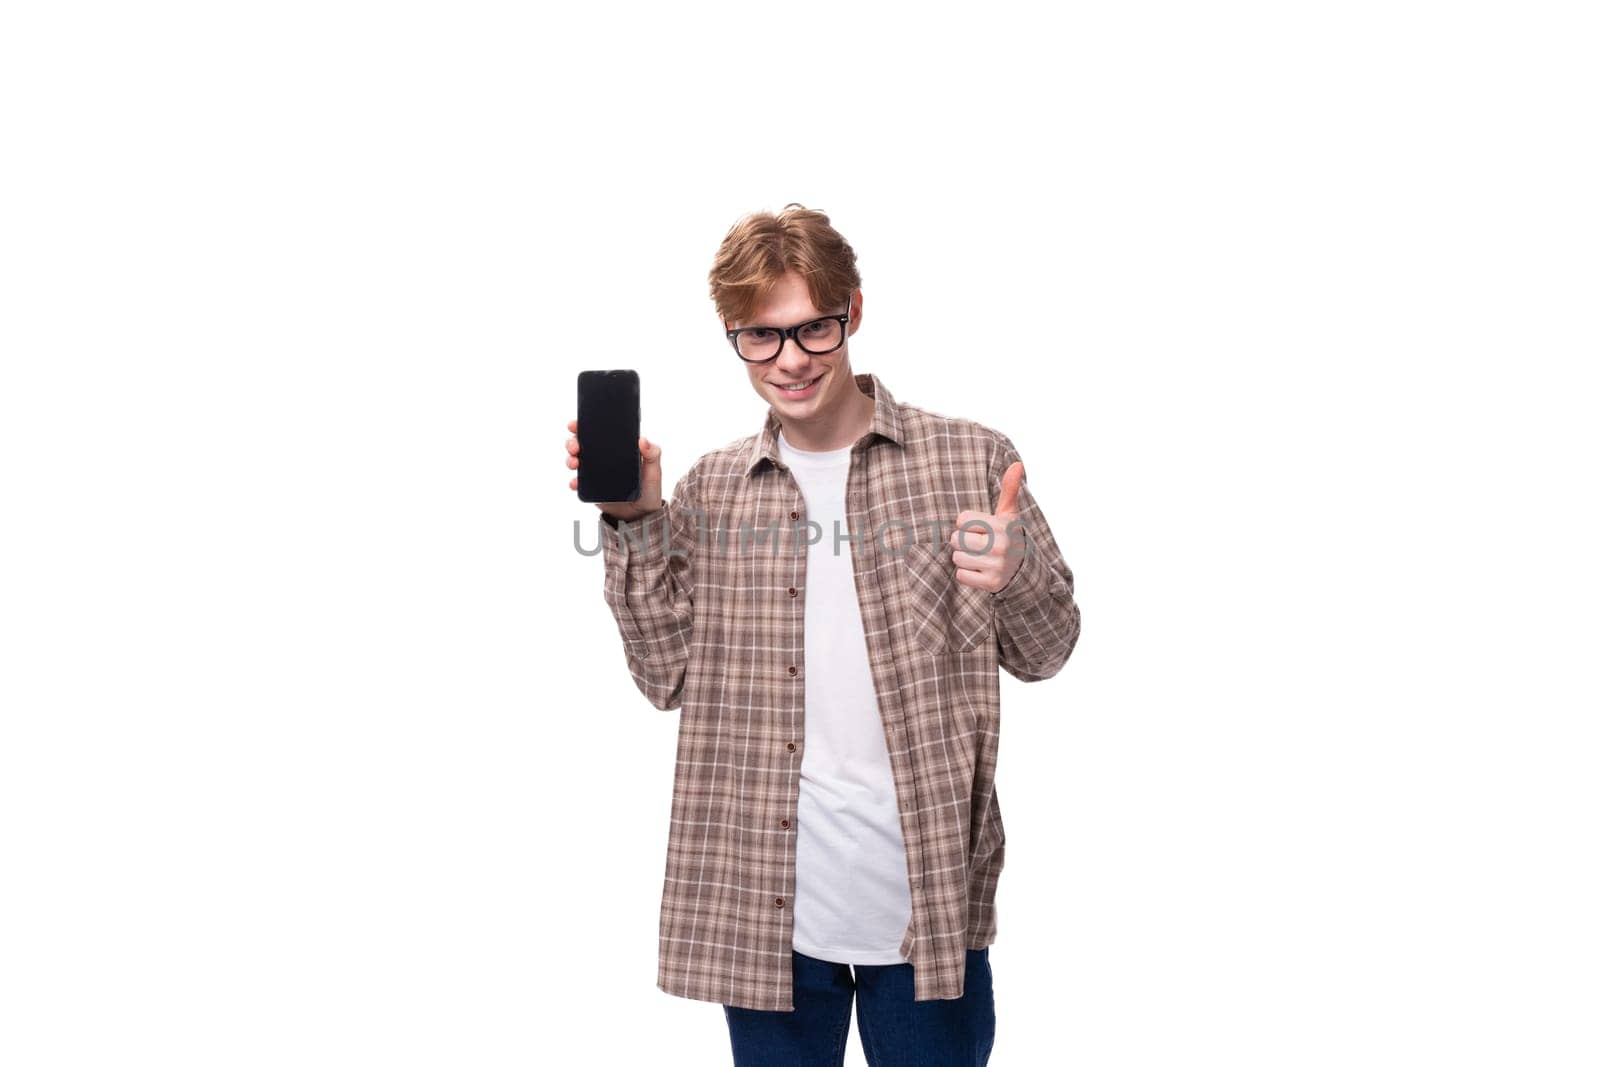 a young caucasian guy with red hair in glasses and a plaid shirt shows the screen of a smartphone. advertising concept.